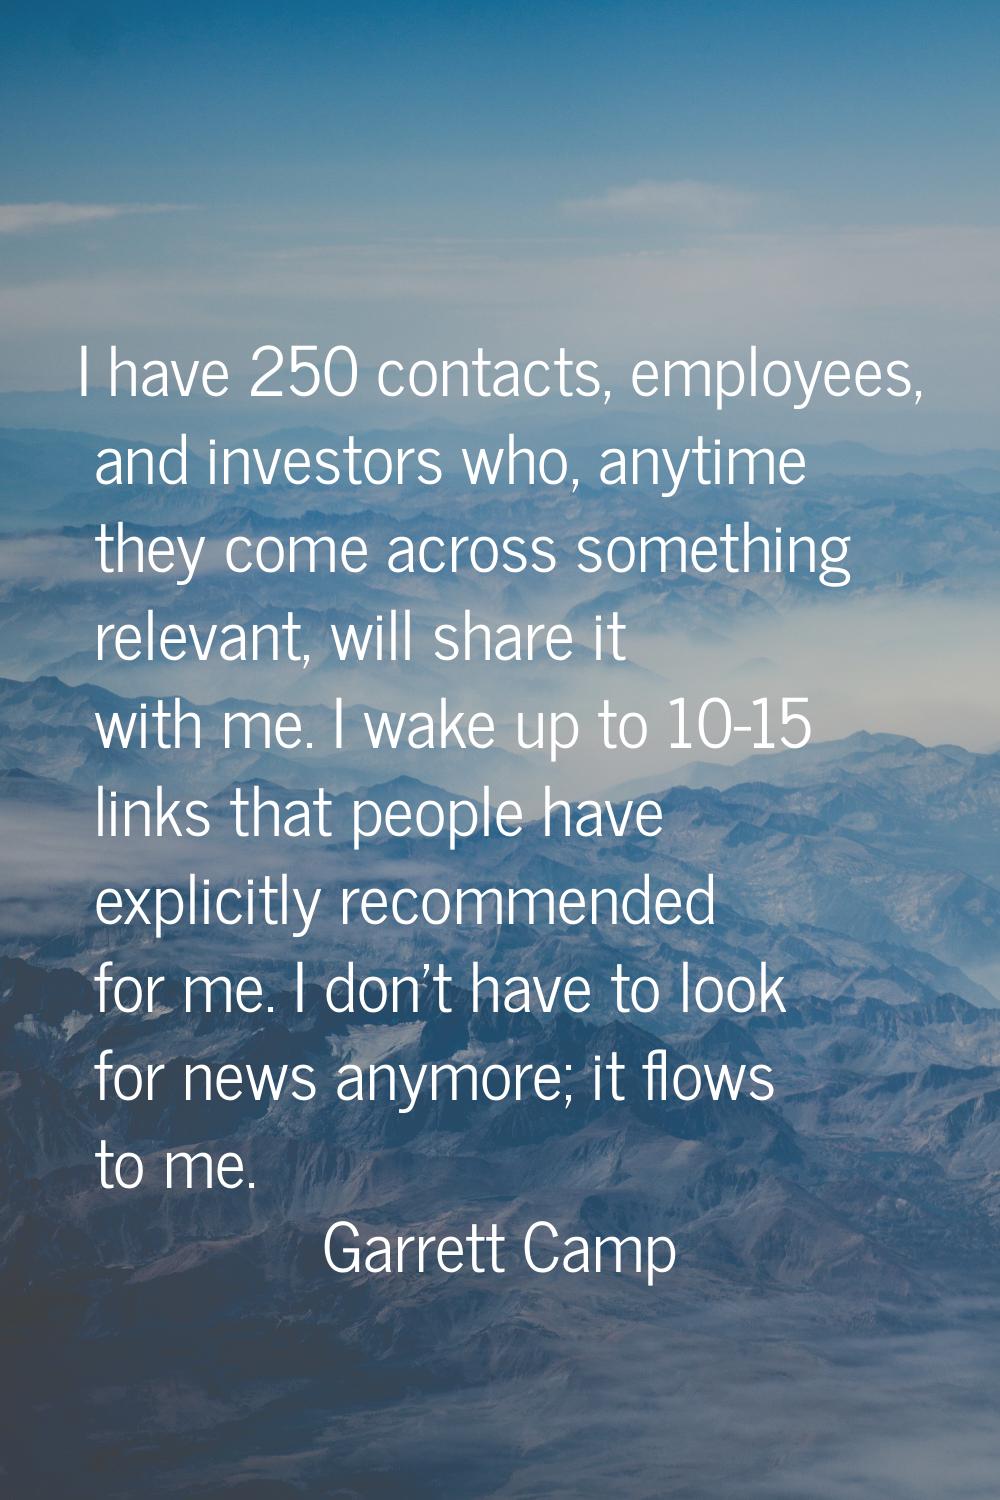 I have 250 contacts, employees, and investors who, anytime they come across something relevant, wil